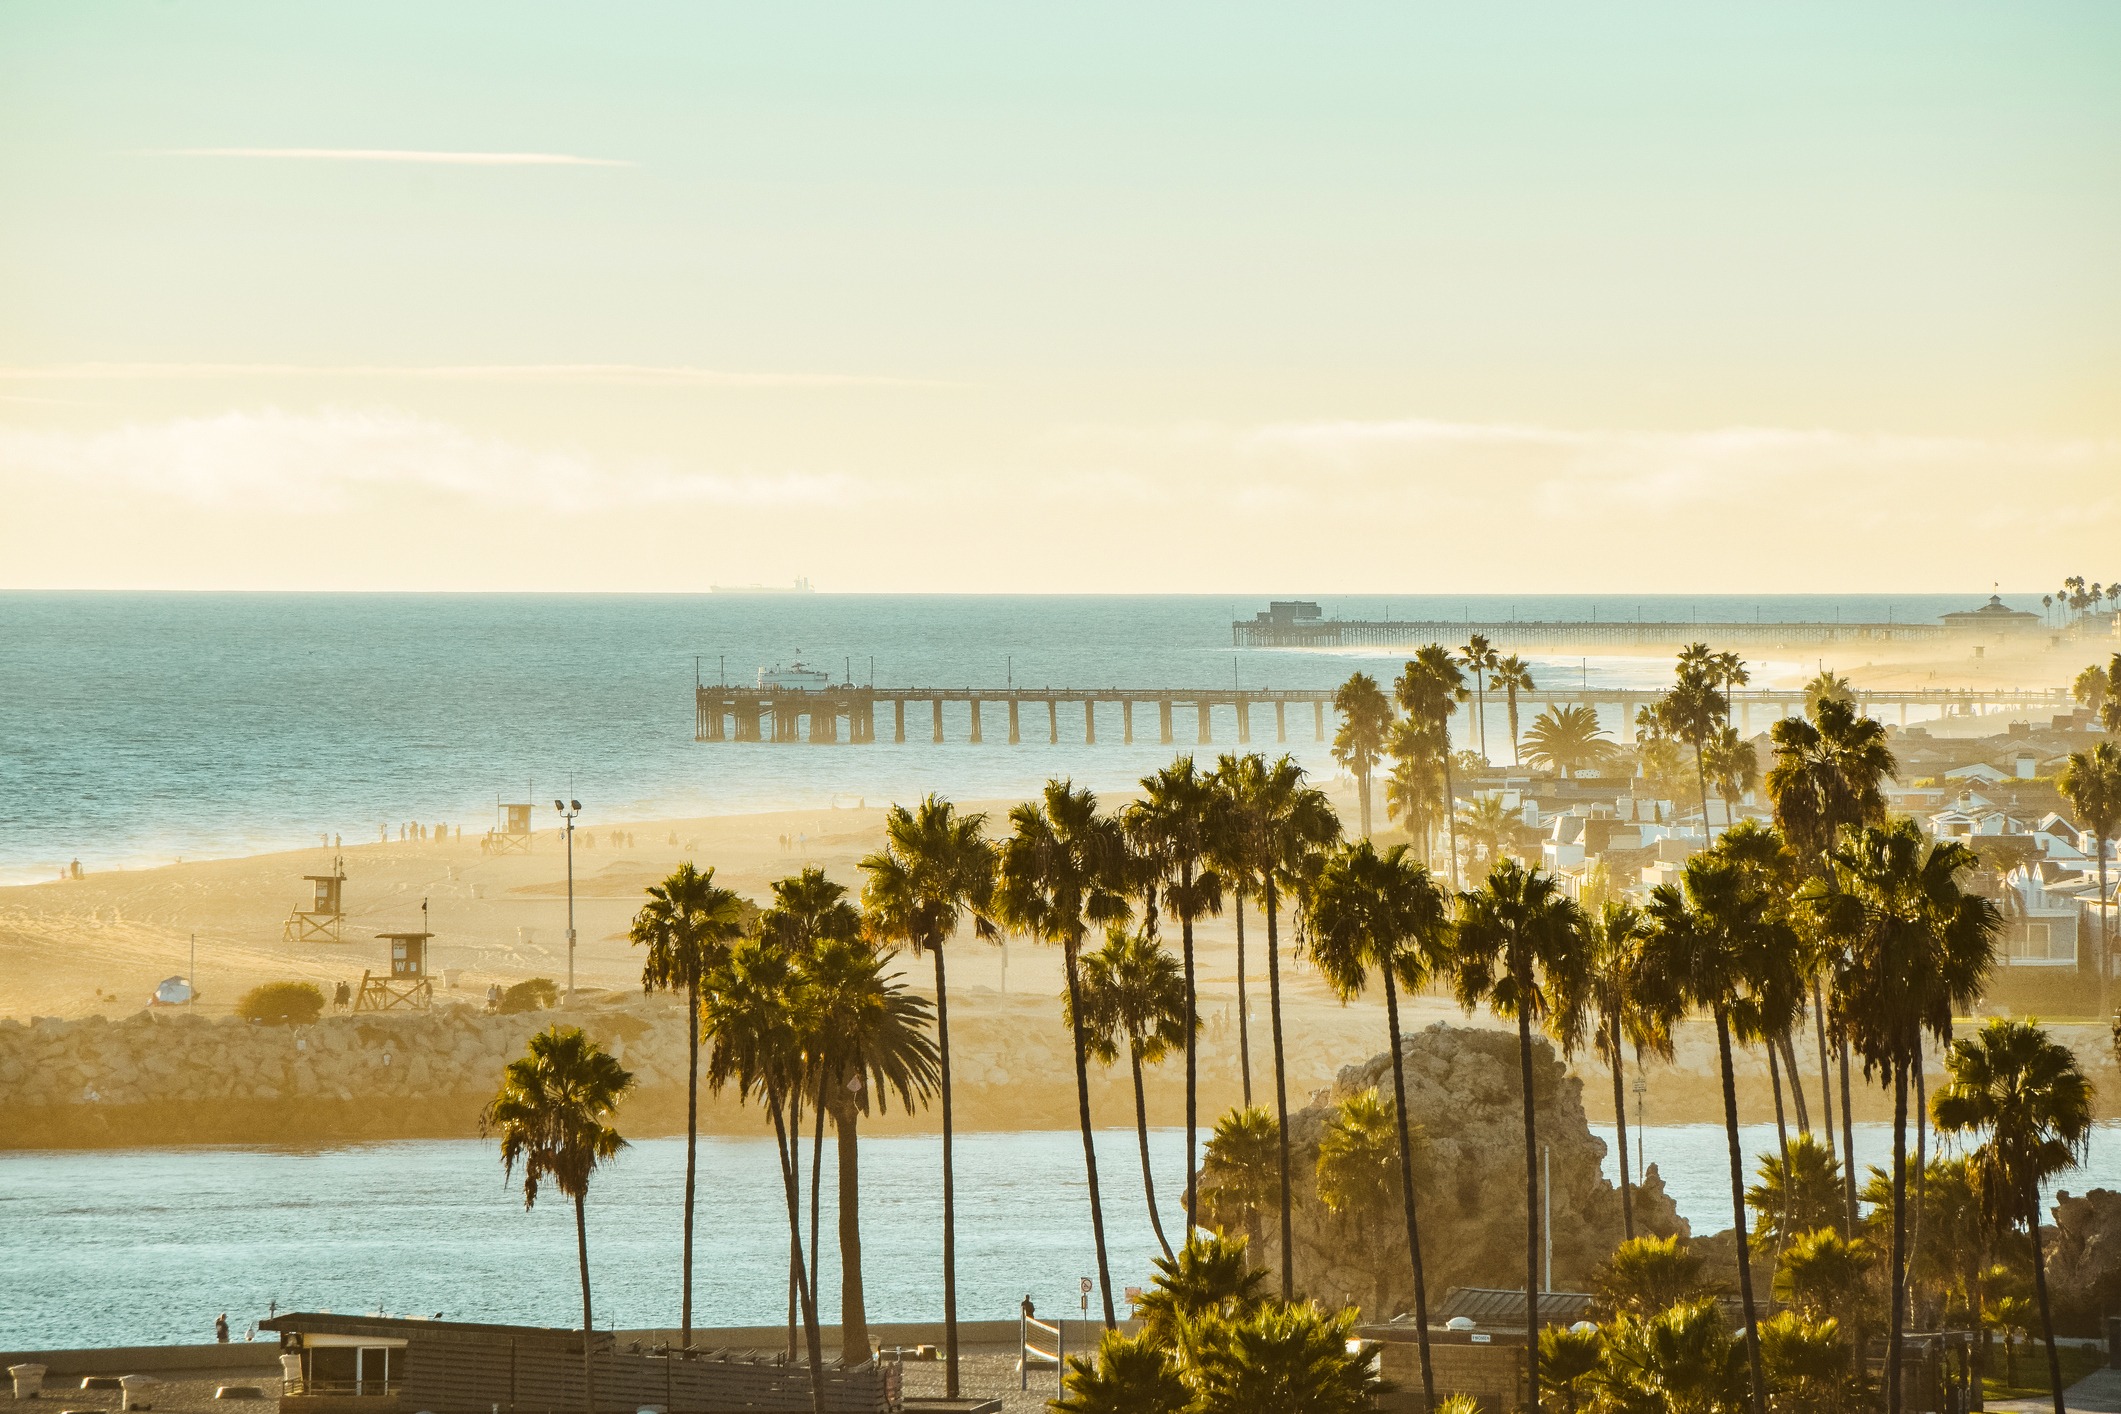 A California beach at sunrise. Palm trees are in the foreground with two piers visible in the distance.